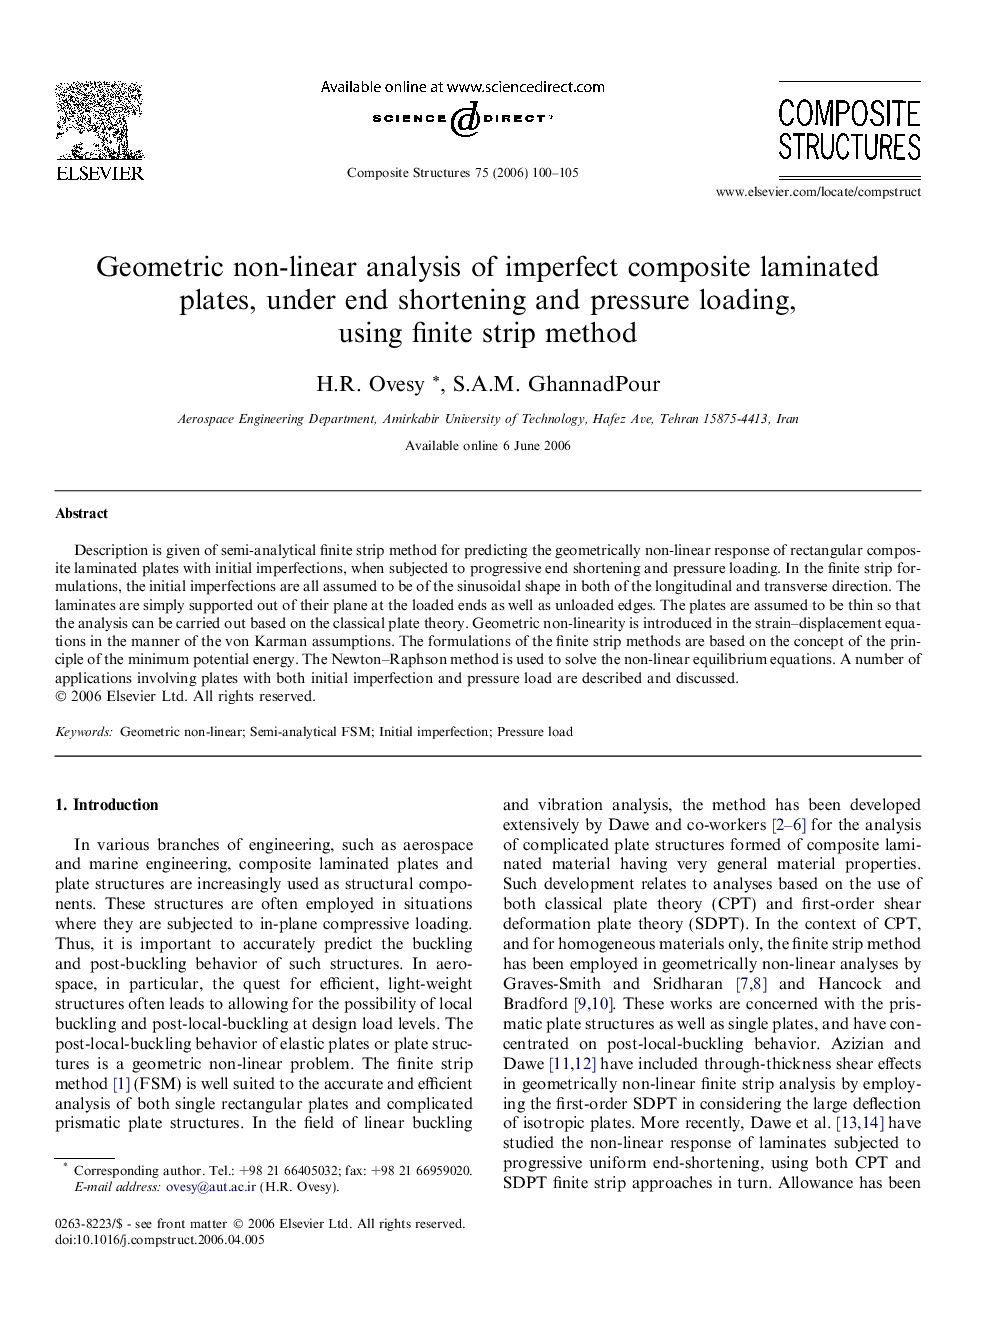 Geometric non-linear analysis of imperfect composite laminated plates, under end shortening and pressure loading, using finite strip method